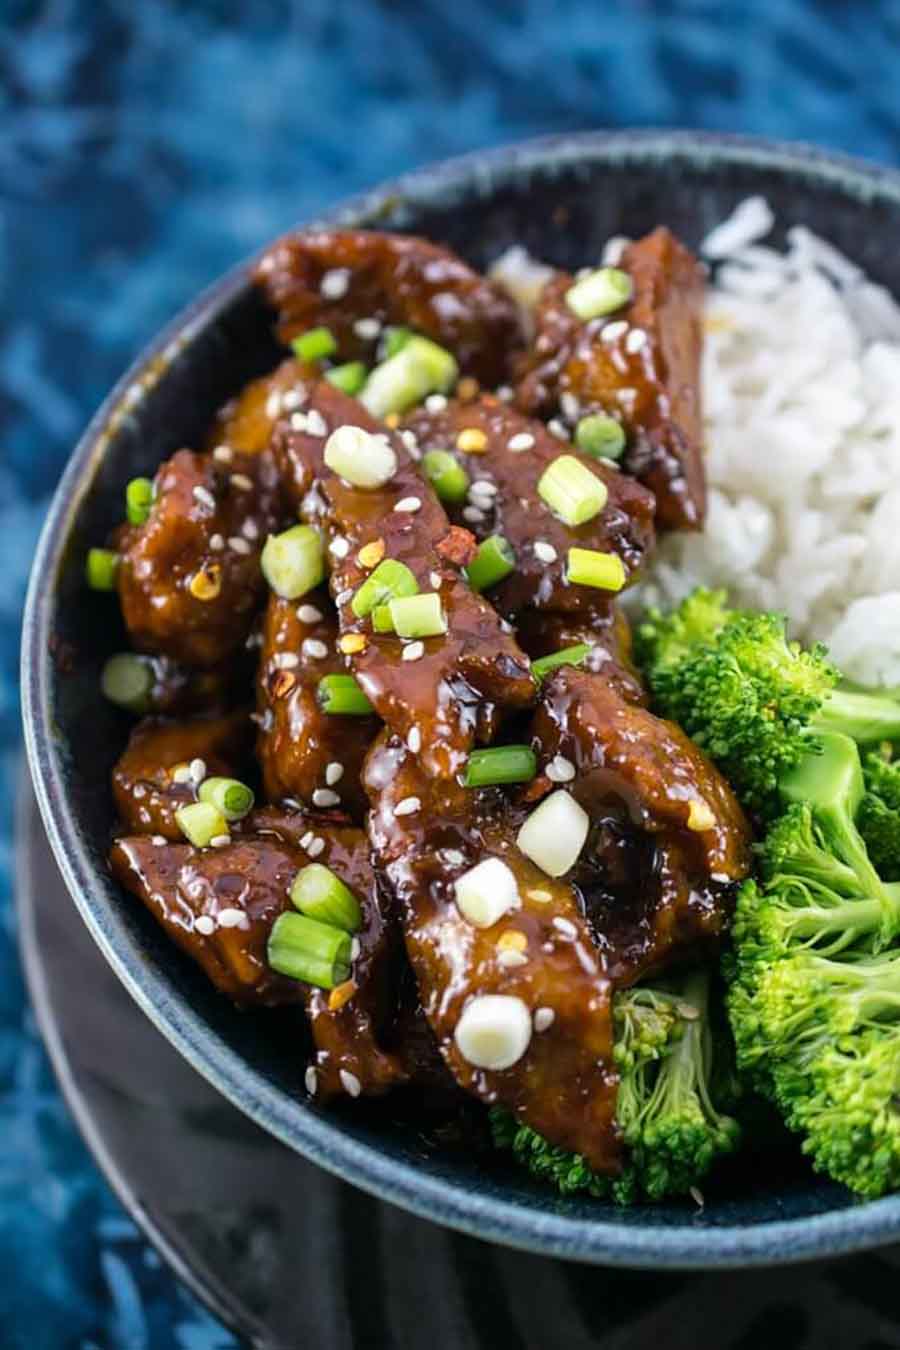 Blue bowl of seitan "beef" served with white rice and broccoli